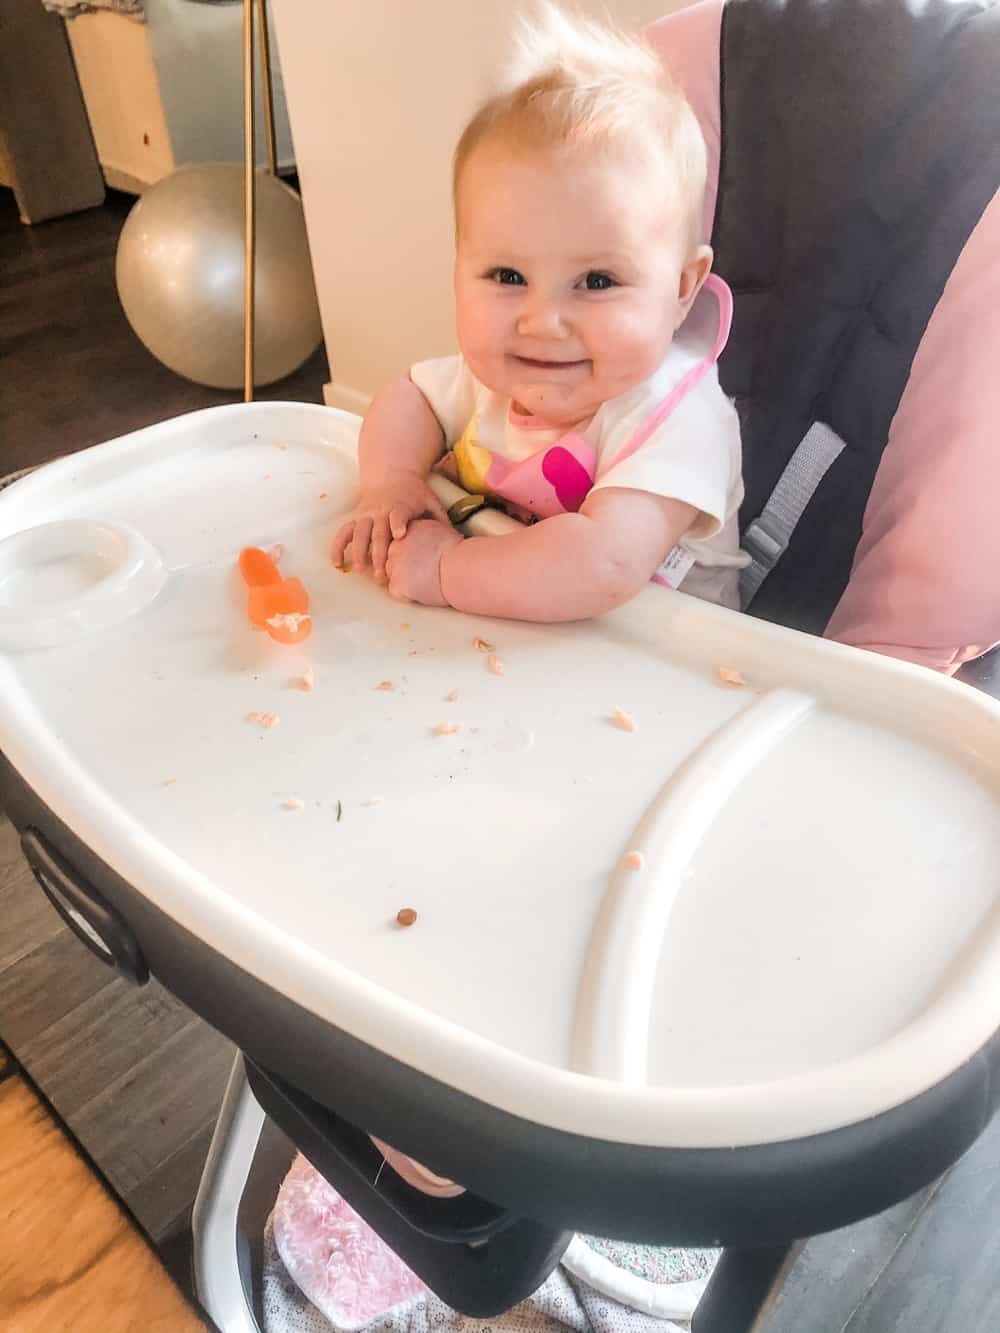 6 month old baby smiling while eating solids with gootensil